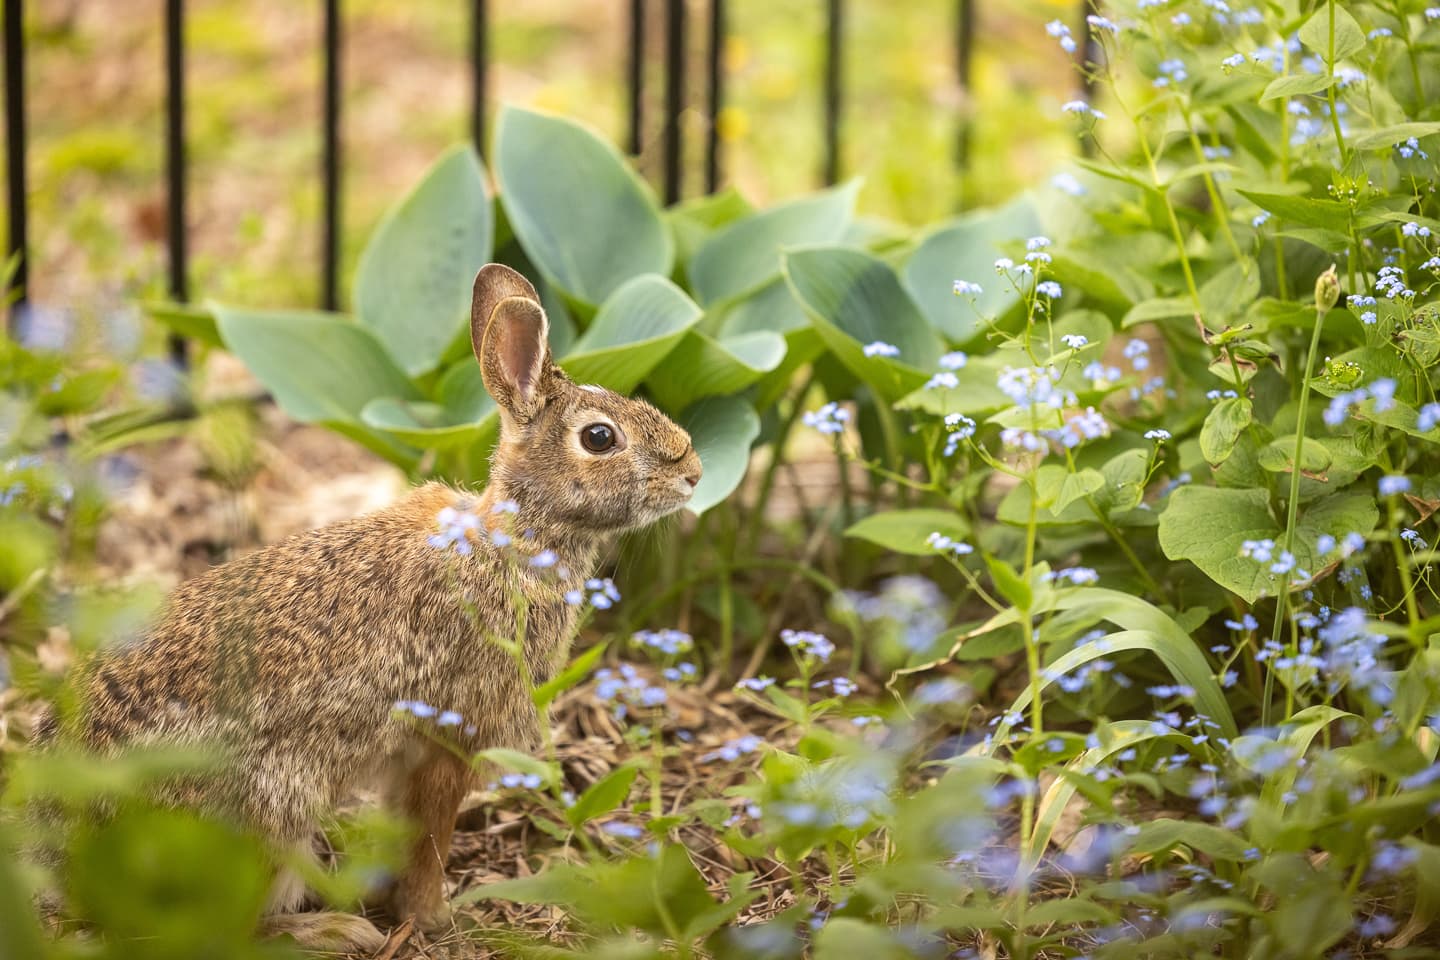 Rabbit in garden with forget-me-nots